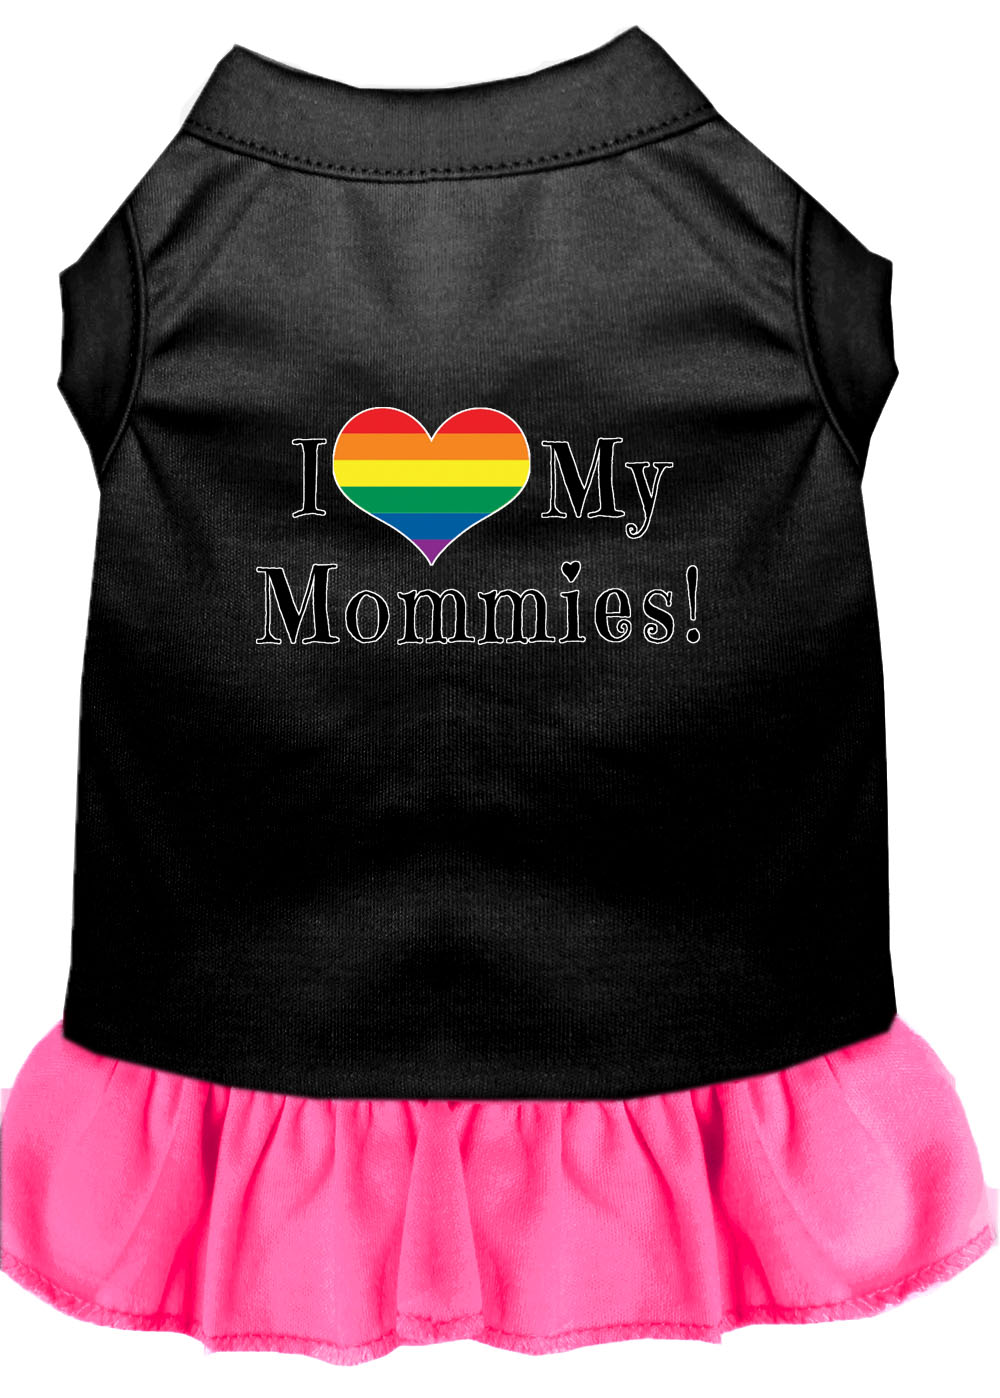 I Heart my Mommies Screen Print Dog Dress Black with Bright Pink XL